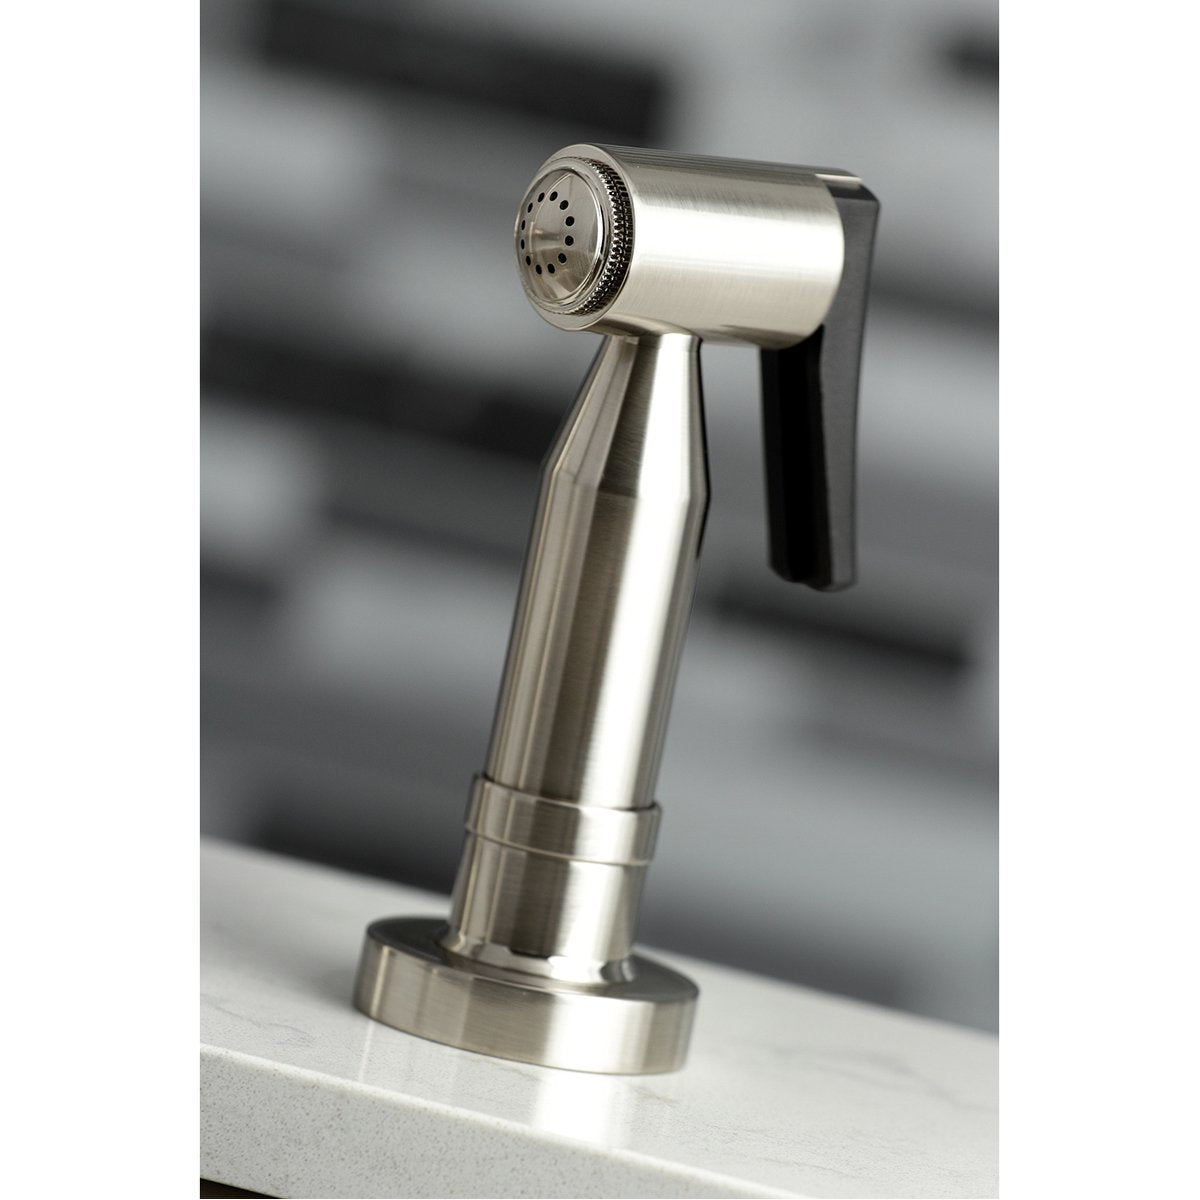 Kingston Brass Concord Two-Handle Bridge Kitchen Faucet with Brass Side Sprayer